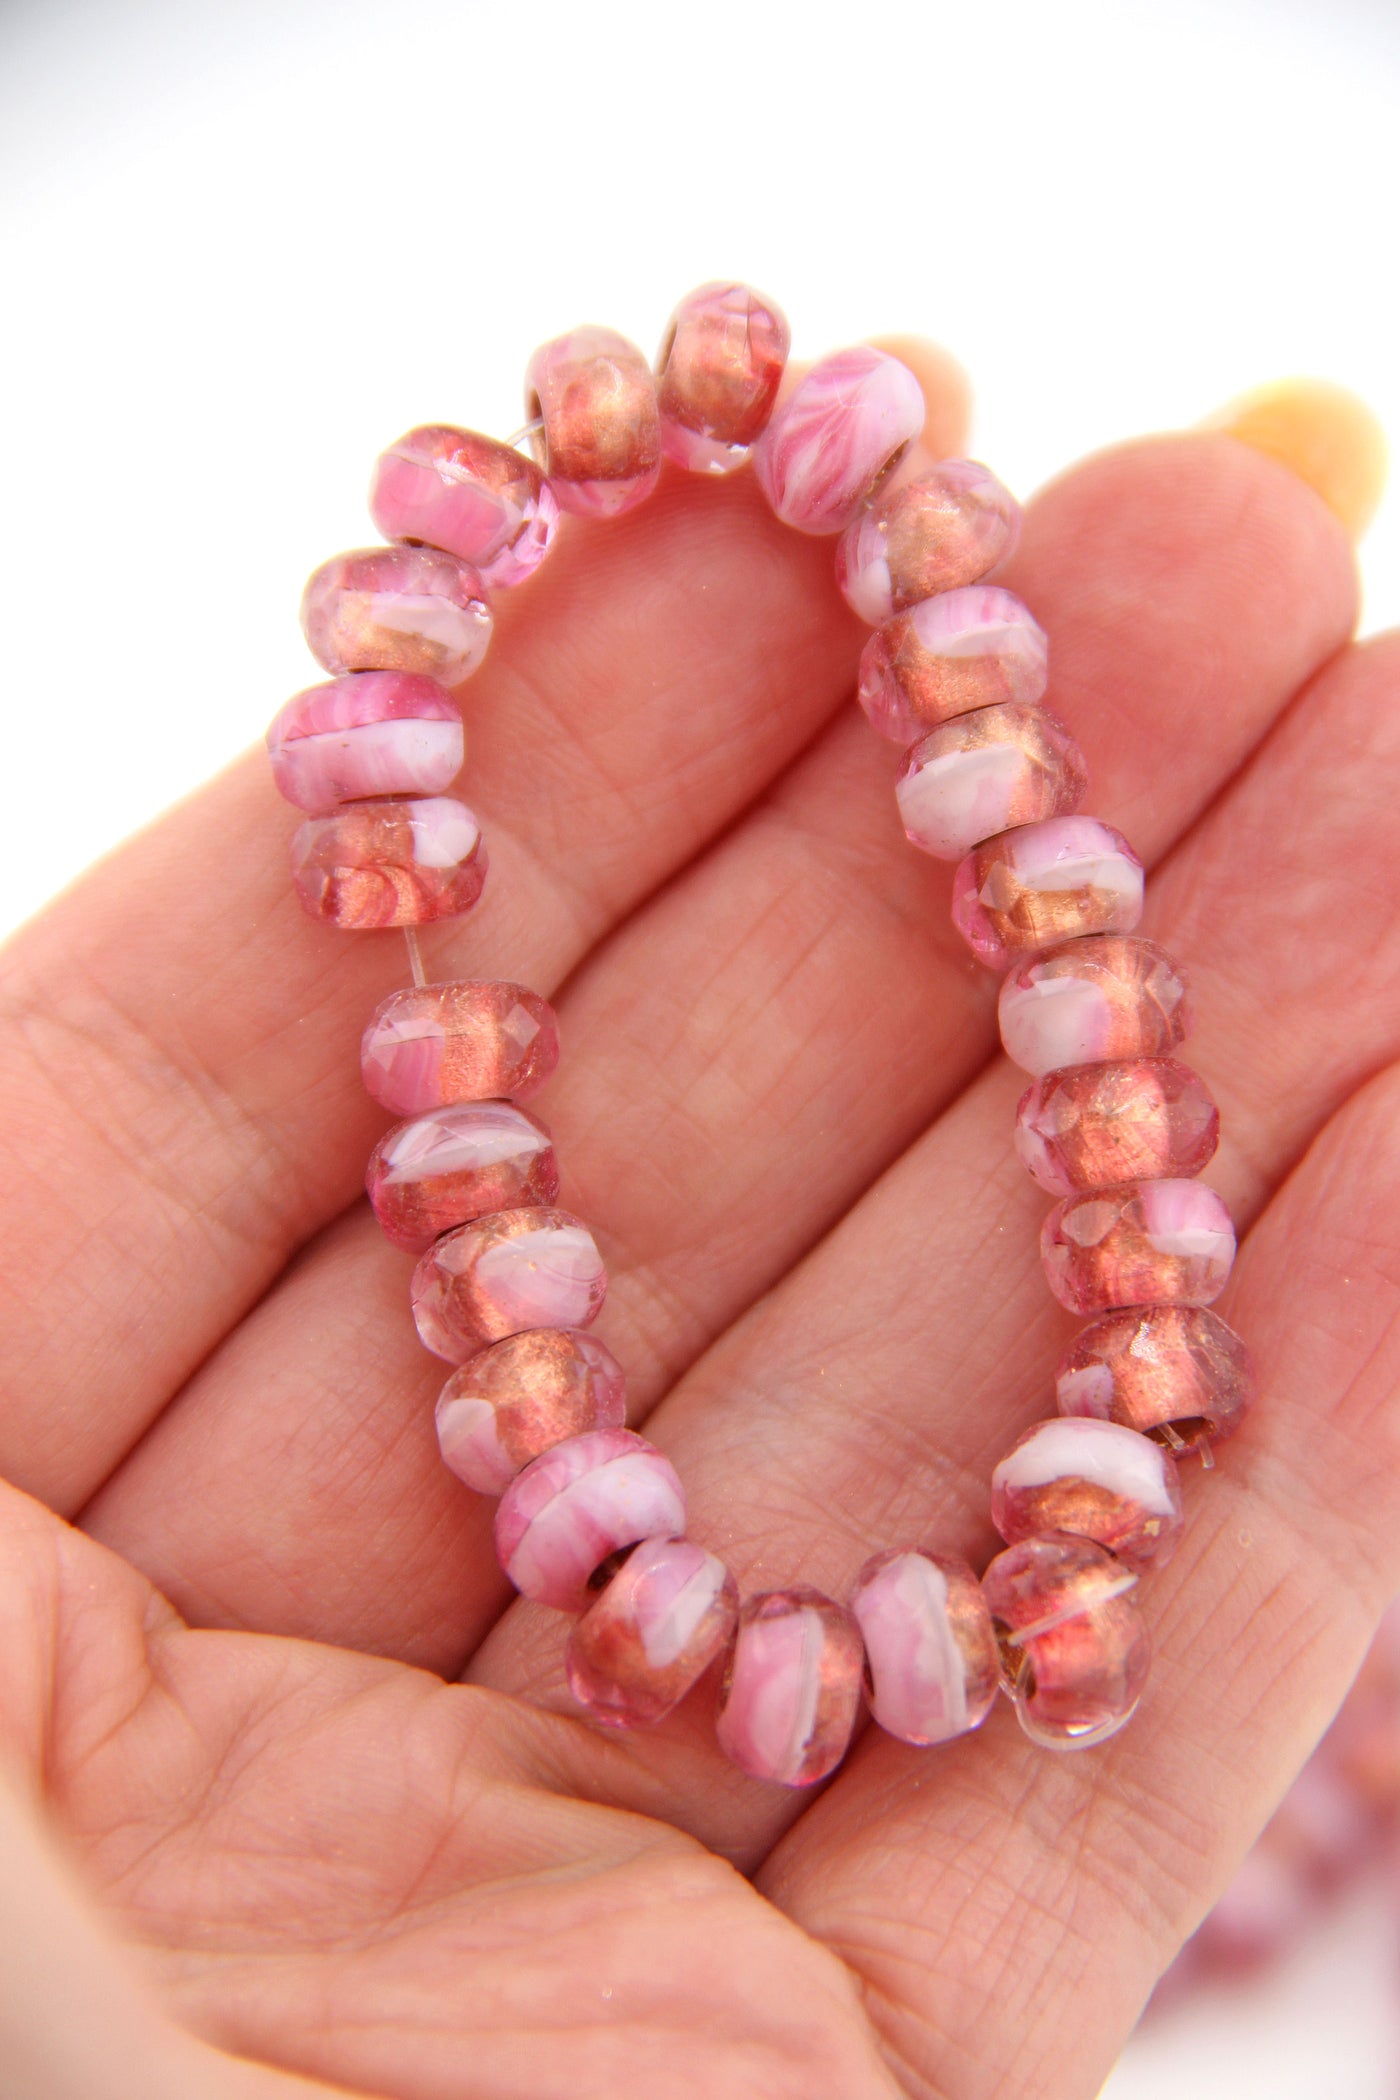 Pink & White Czech Glass with Copper Lining, 9x6mm, 25 Rondelle Beads Inspired by Forte Beads, Influencer Style Trendy Bracelet, Easy to DIY